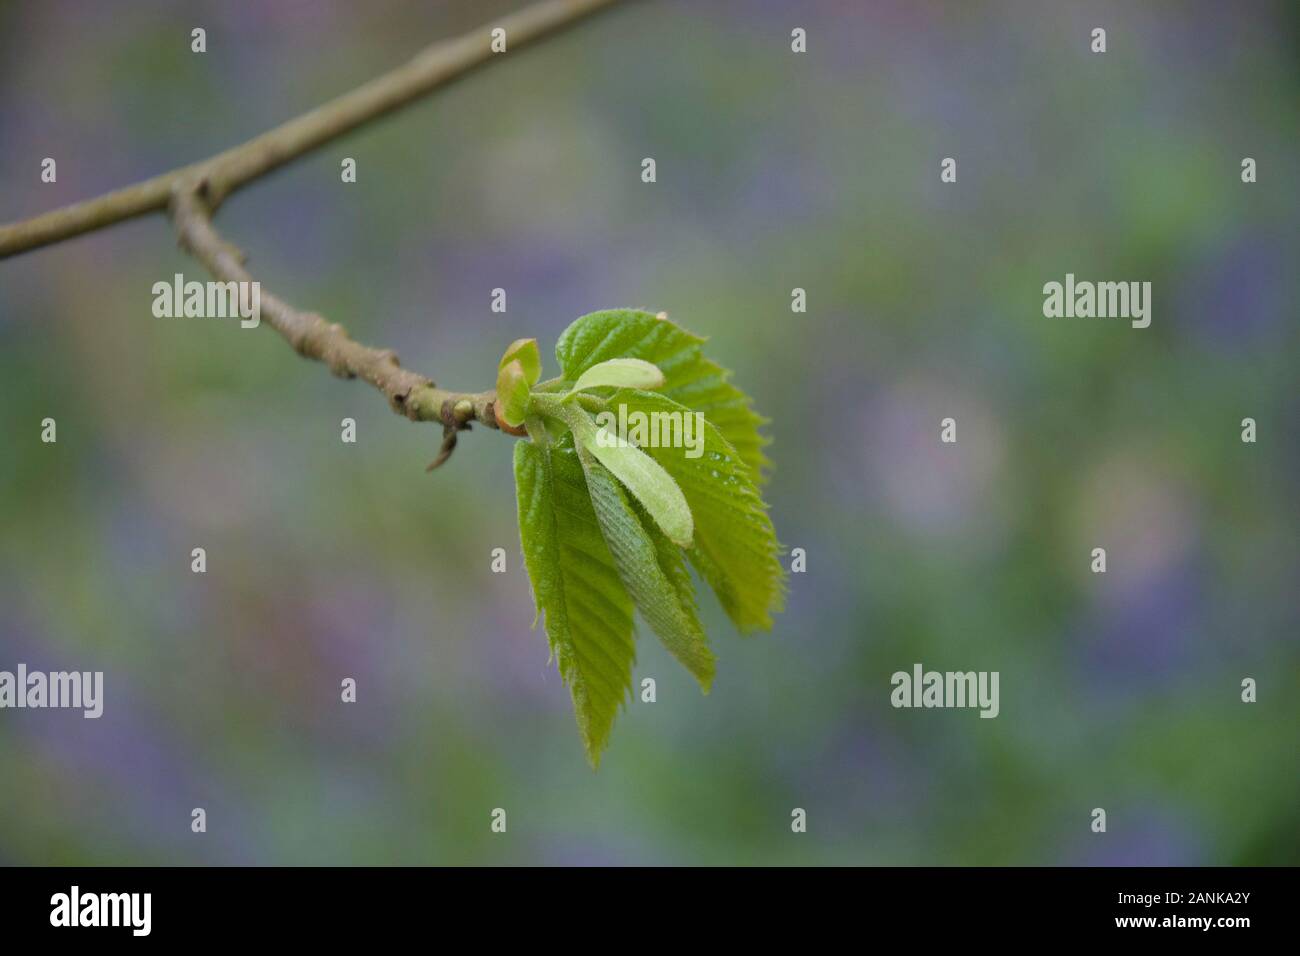 Fresh green leaves on a branch of a Hazel tree (Corylus avellana). Budburst, unfurling spring leaf on the end of a twig. Soft and young foliage in a w Stock Photo